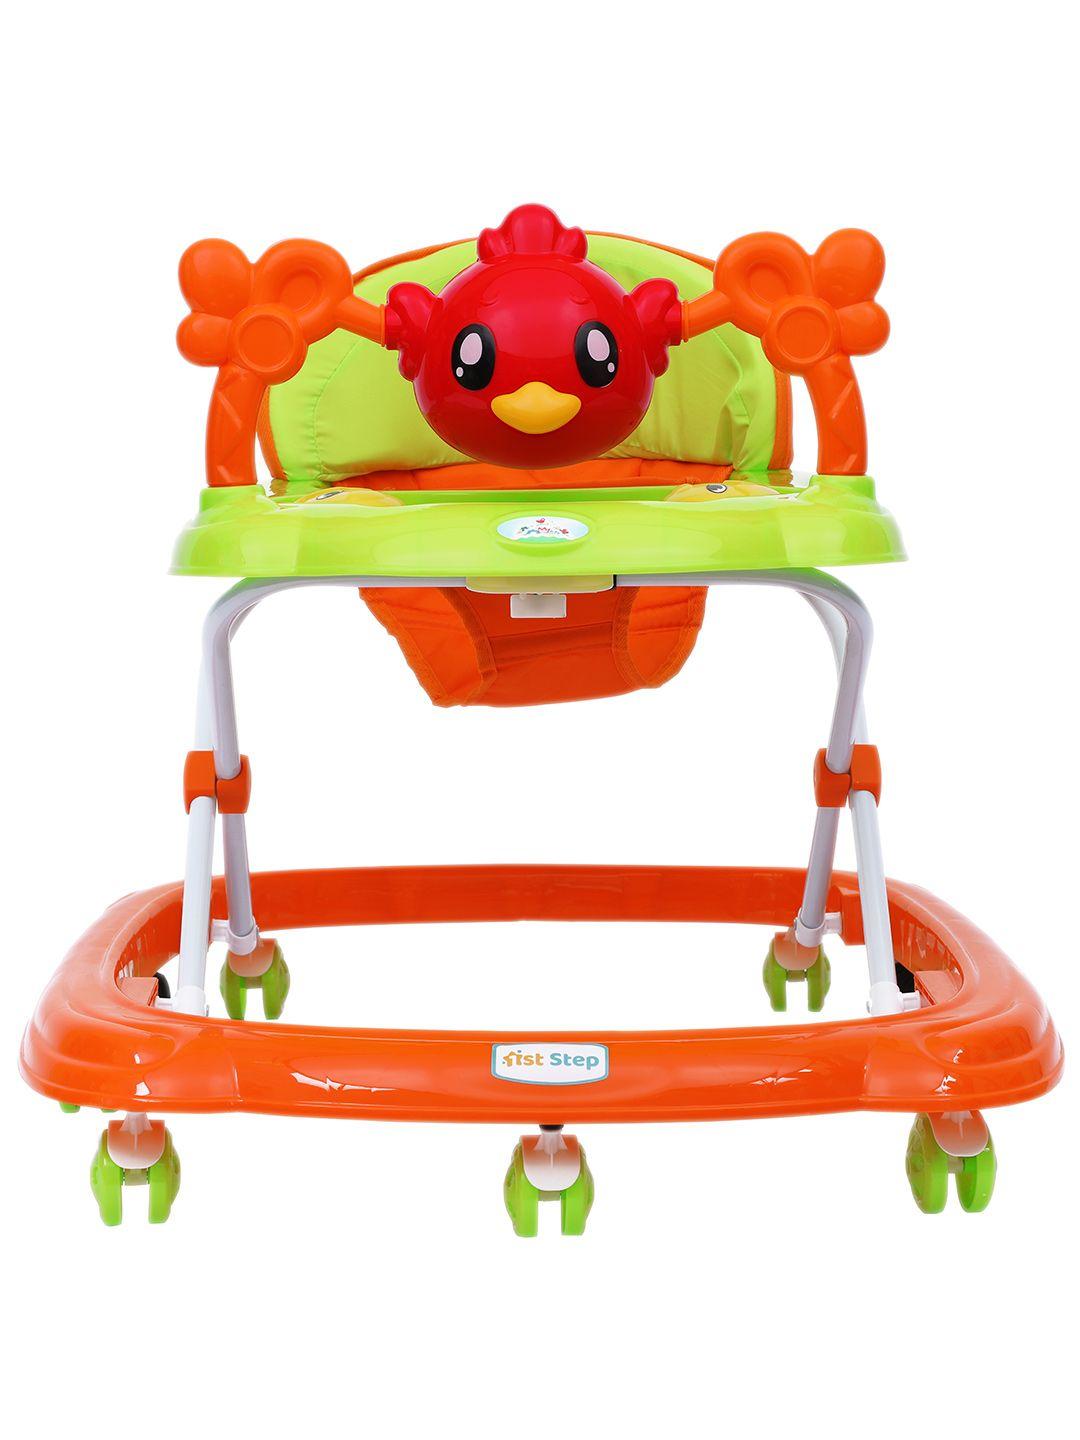 1st step unisex kids orange walker with 4 level height adjustment & musical play tray